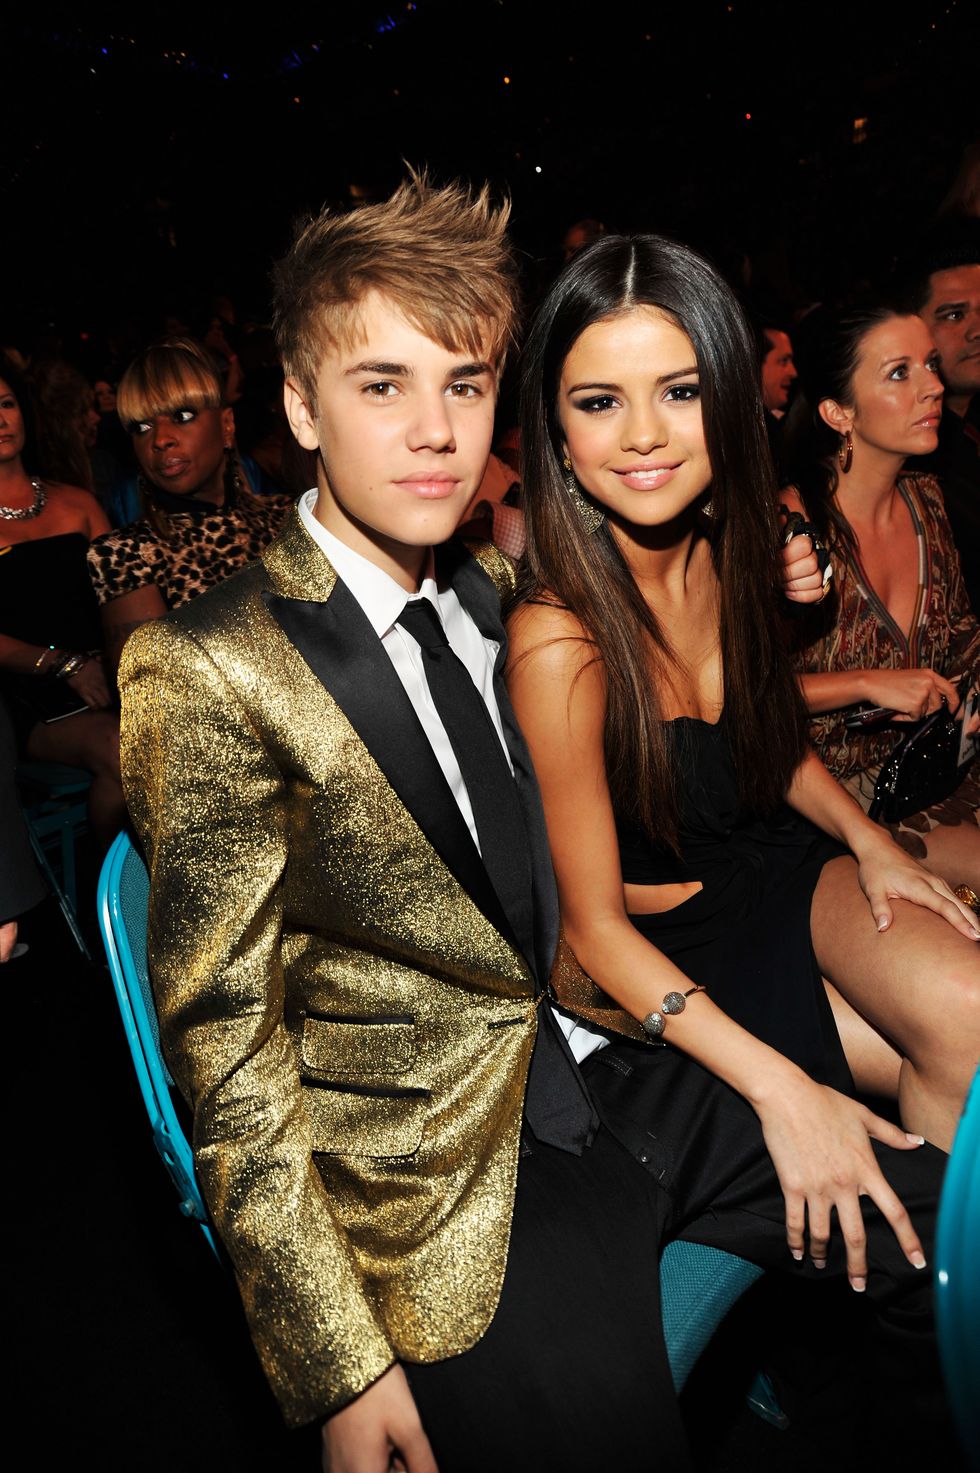 las vegas, nv may 22 singers justin bieber l and selena gomez pose during the 2011 billboard music awards at the mgm grand garden arena may 22, 2011 in las vegas, nevada photo by kevin mazurwireimage